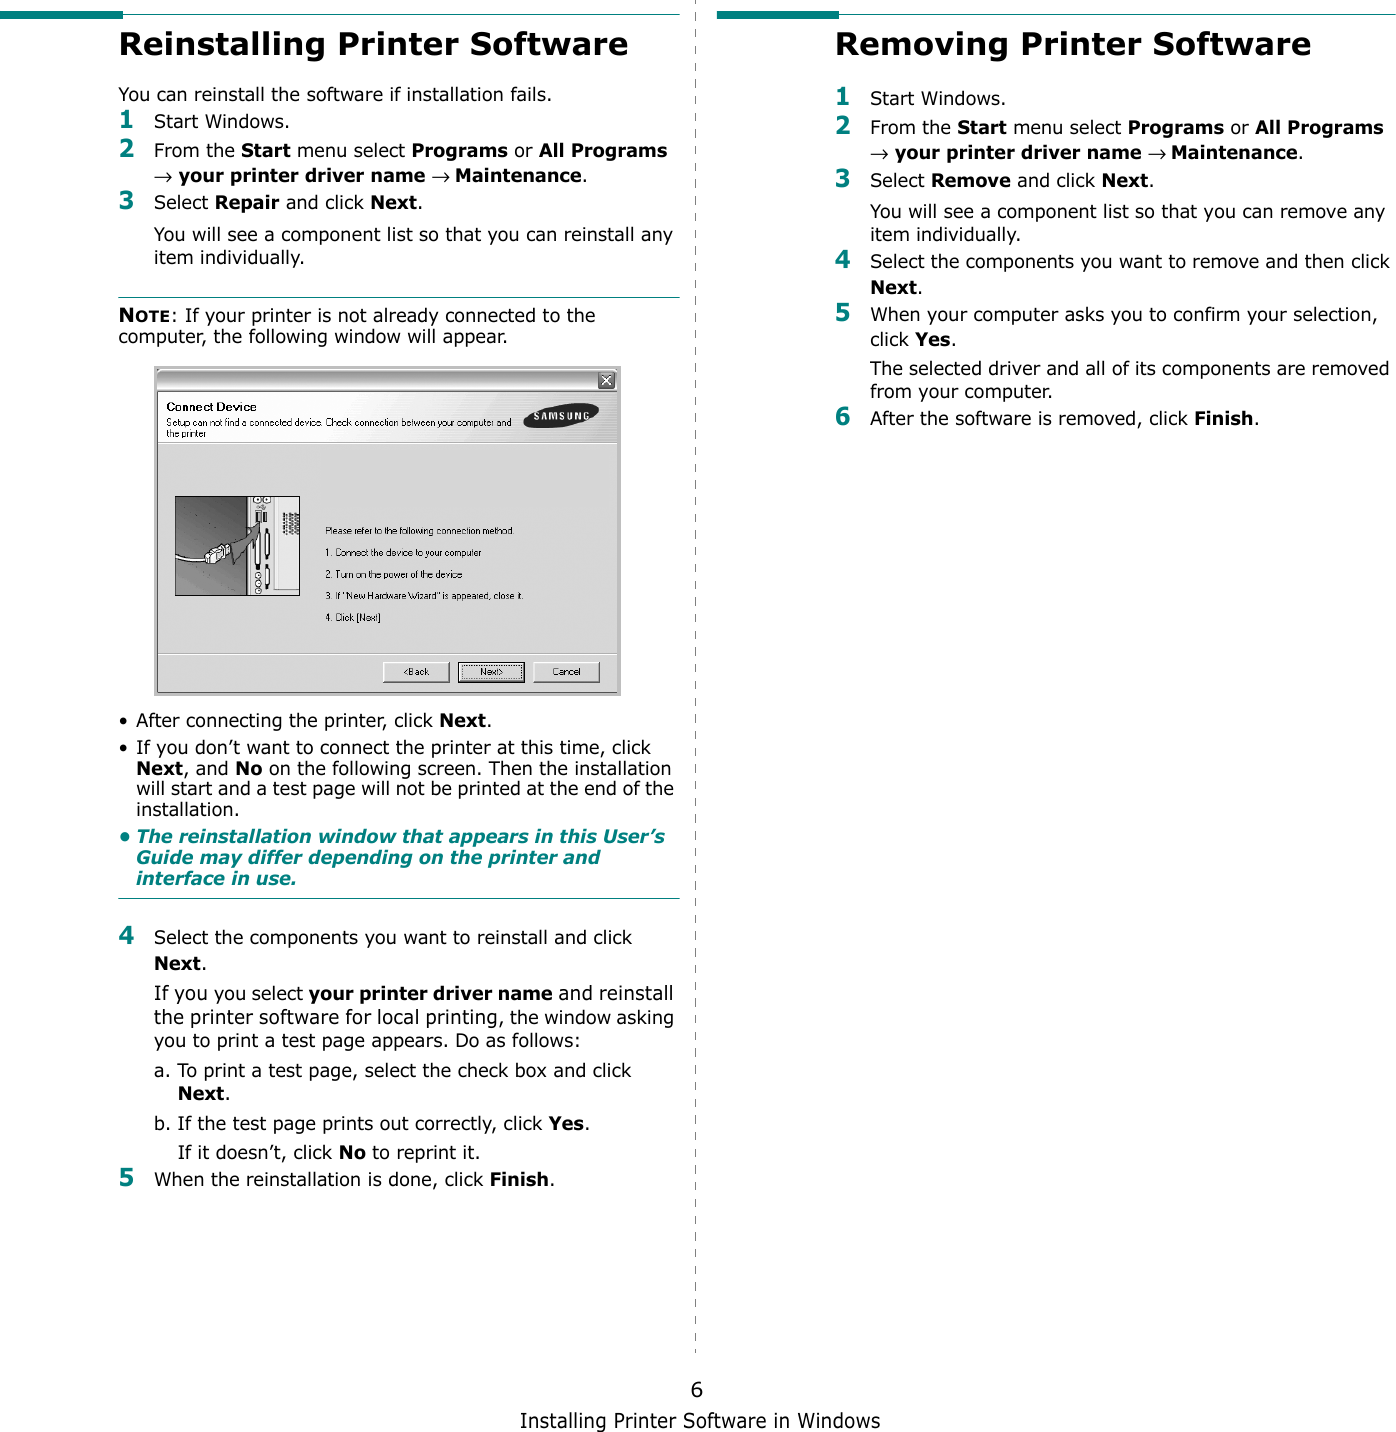 Installing Printer Software in Windows6Reinstalling Printer SoftwareYou can reinstall the software if installation fails.1Start Windows.2From the Start menu select Programs or All Programs → your printer driver name → Maintenance.3Select Repair and click Next.You will see a component list so that you can reinstall any item individually.NOTE: If your printer is not already connected to the computer, the following window will appear.• After connecting the printer, click Next.• If you don’t want to connect the printer at this time, click Next, and No on the following screen. Then the installation will start and a test page will not be printed at the end of the installation.• The reinstallation window that appears in this User’s Guide may differ depending on the printer and interface in use.4Select the components you want to reinstall and click Next.If you you select your printer driver name and reinstall the printer software for local printing, the window asking you to print a test page appears. Do as follows:a. To print a test page, select the check box and click Next.b. If the test page prints out correctly, click Yes.If it doesn’t, click No to reprint it.5When the reinstallation is done, click Finish.Removing Printer Software1Start Windows.2From the Start menu select Programs or All Programs → your printer driver name → Maintenance.3Select Remove and click Next.You will see a component list so that you can remove any item individually.4Select the components you want to remove and then click Next.5When your computer asks you to confirm your selection, click Yes.The selected driver and all of its components are removed from your computer.6After the software is removed, click Finish.